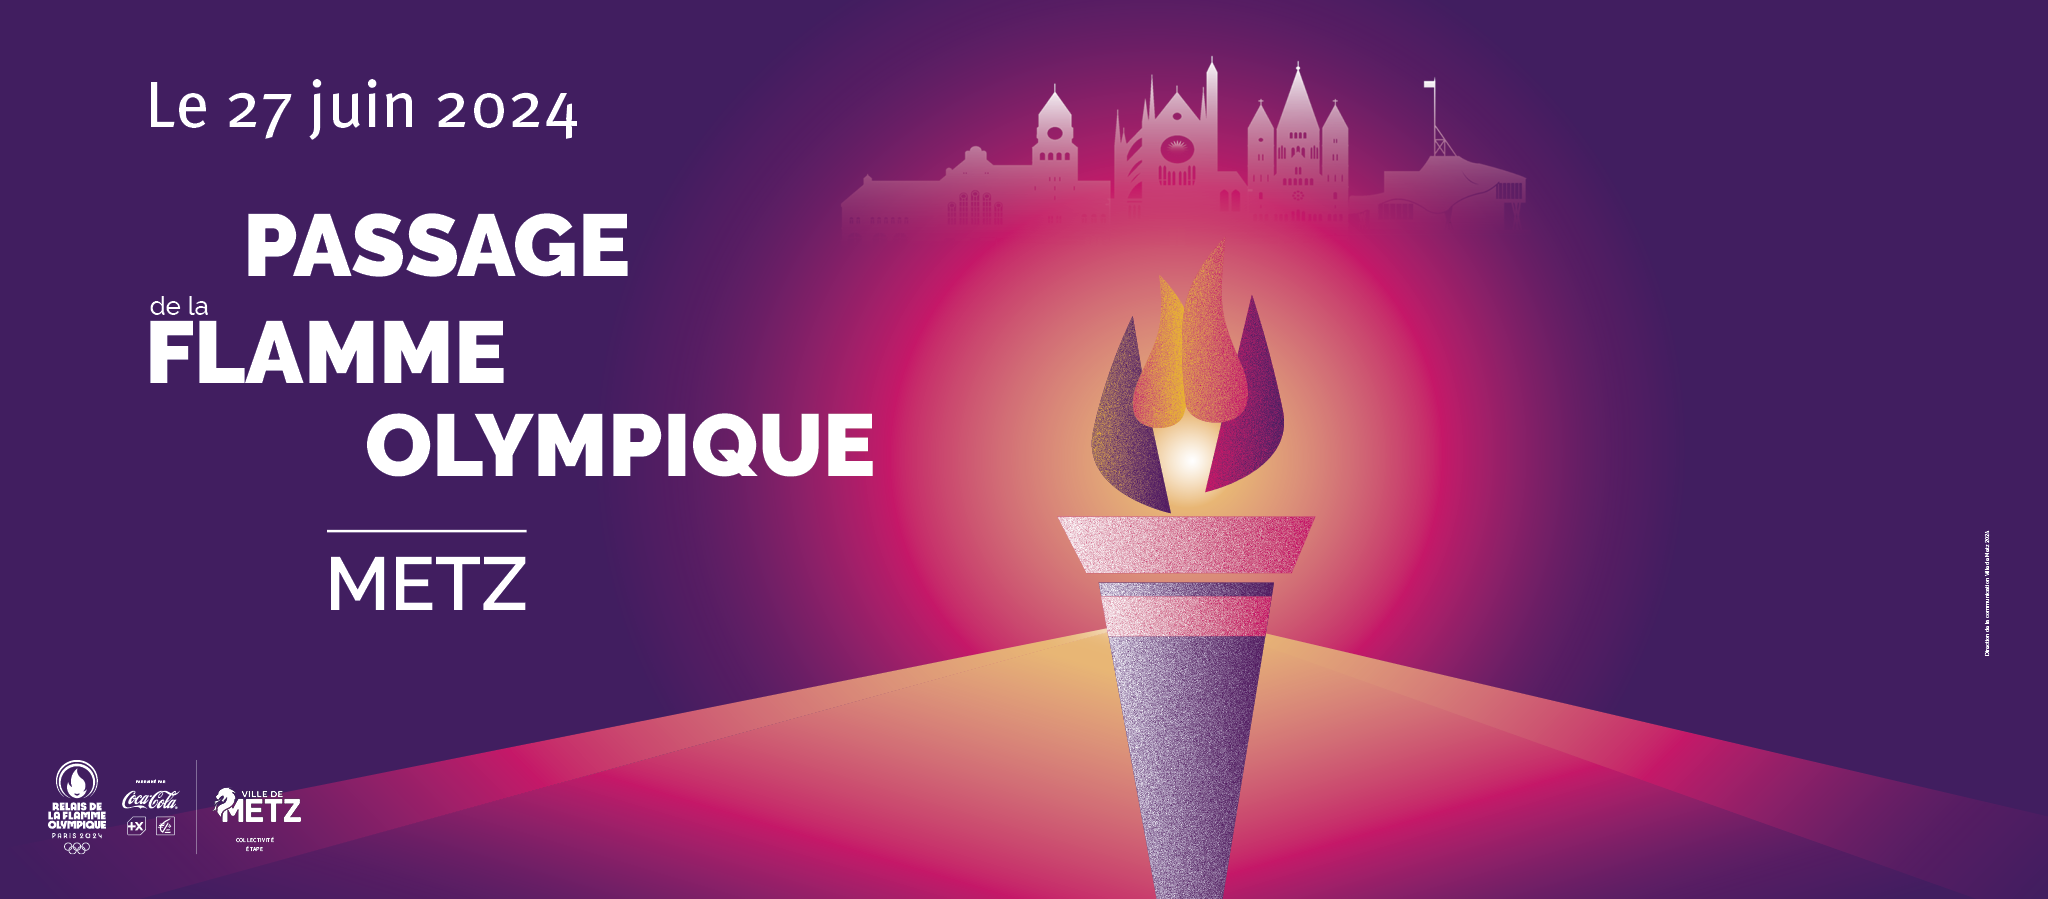 On Thursday 27th June, the City of Metz goes Olympic as the 7th and last stage of the Olympic Flame relay in Moselle.